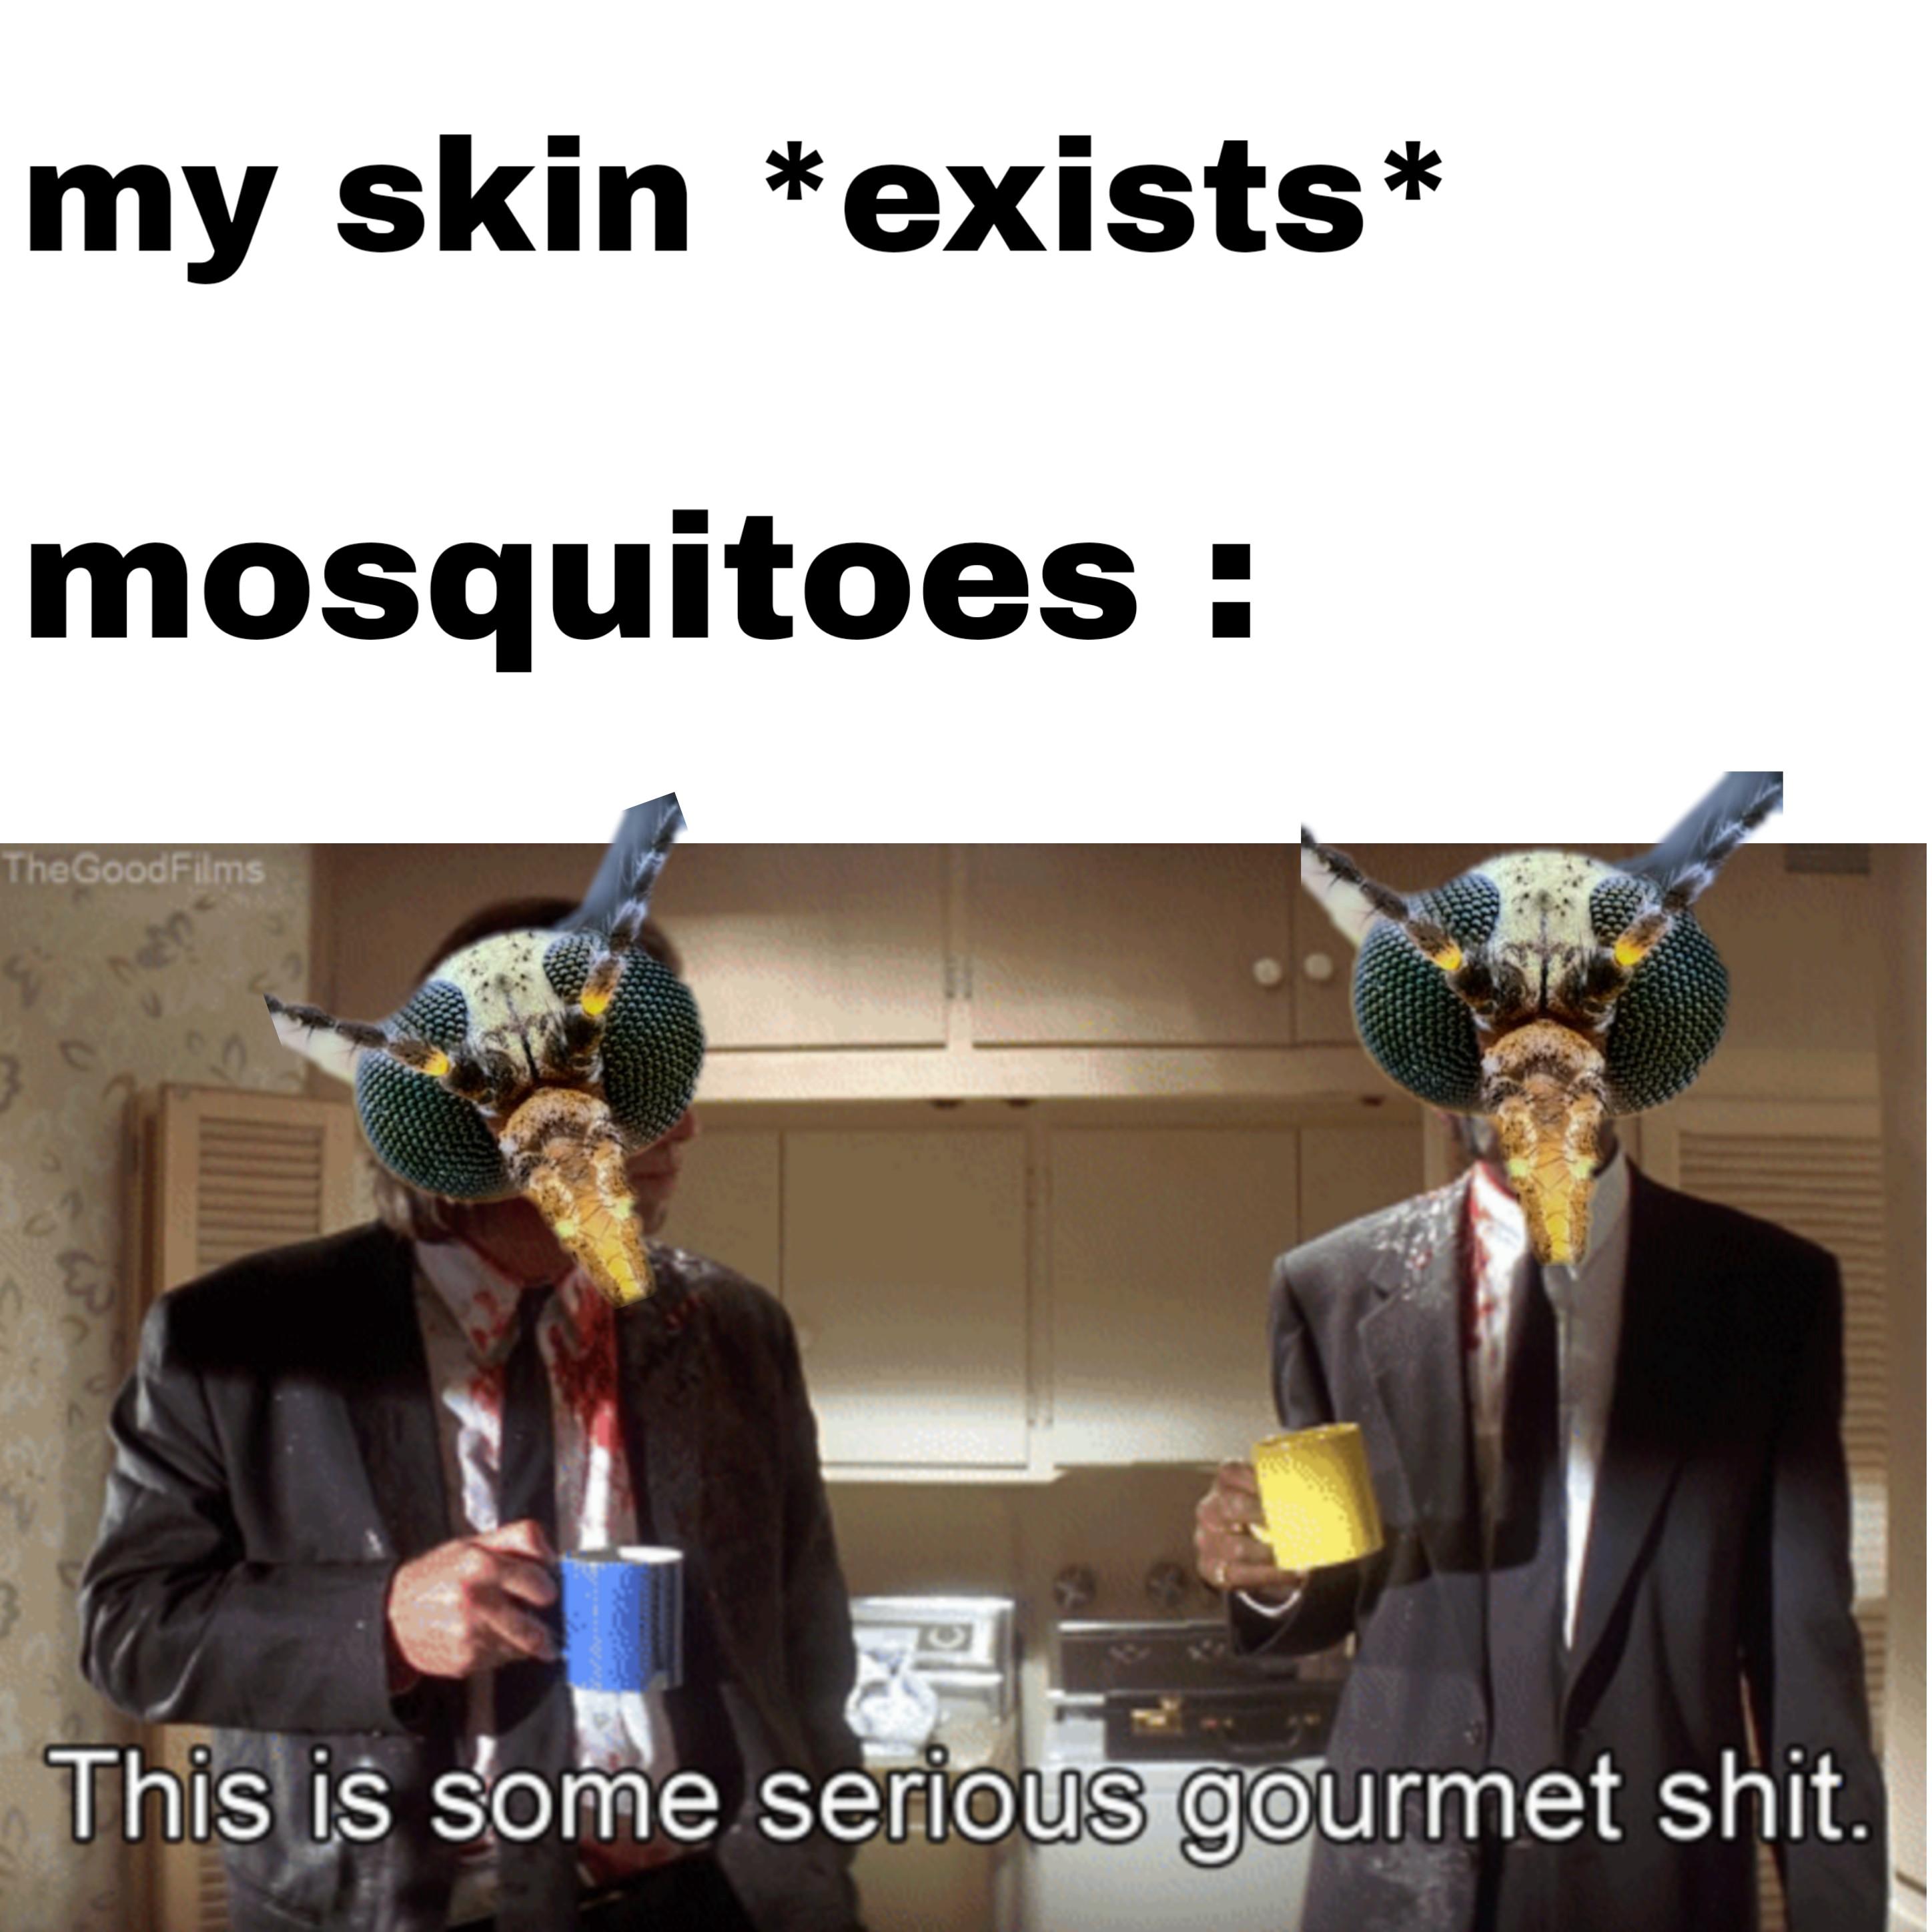 Mosquito meme that says gourmet shit - my skin exists mosquitoes The Good Films This is some serious gourmet shit.